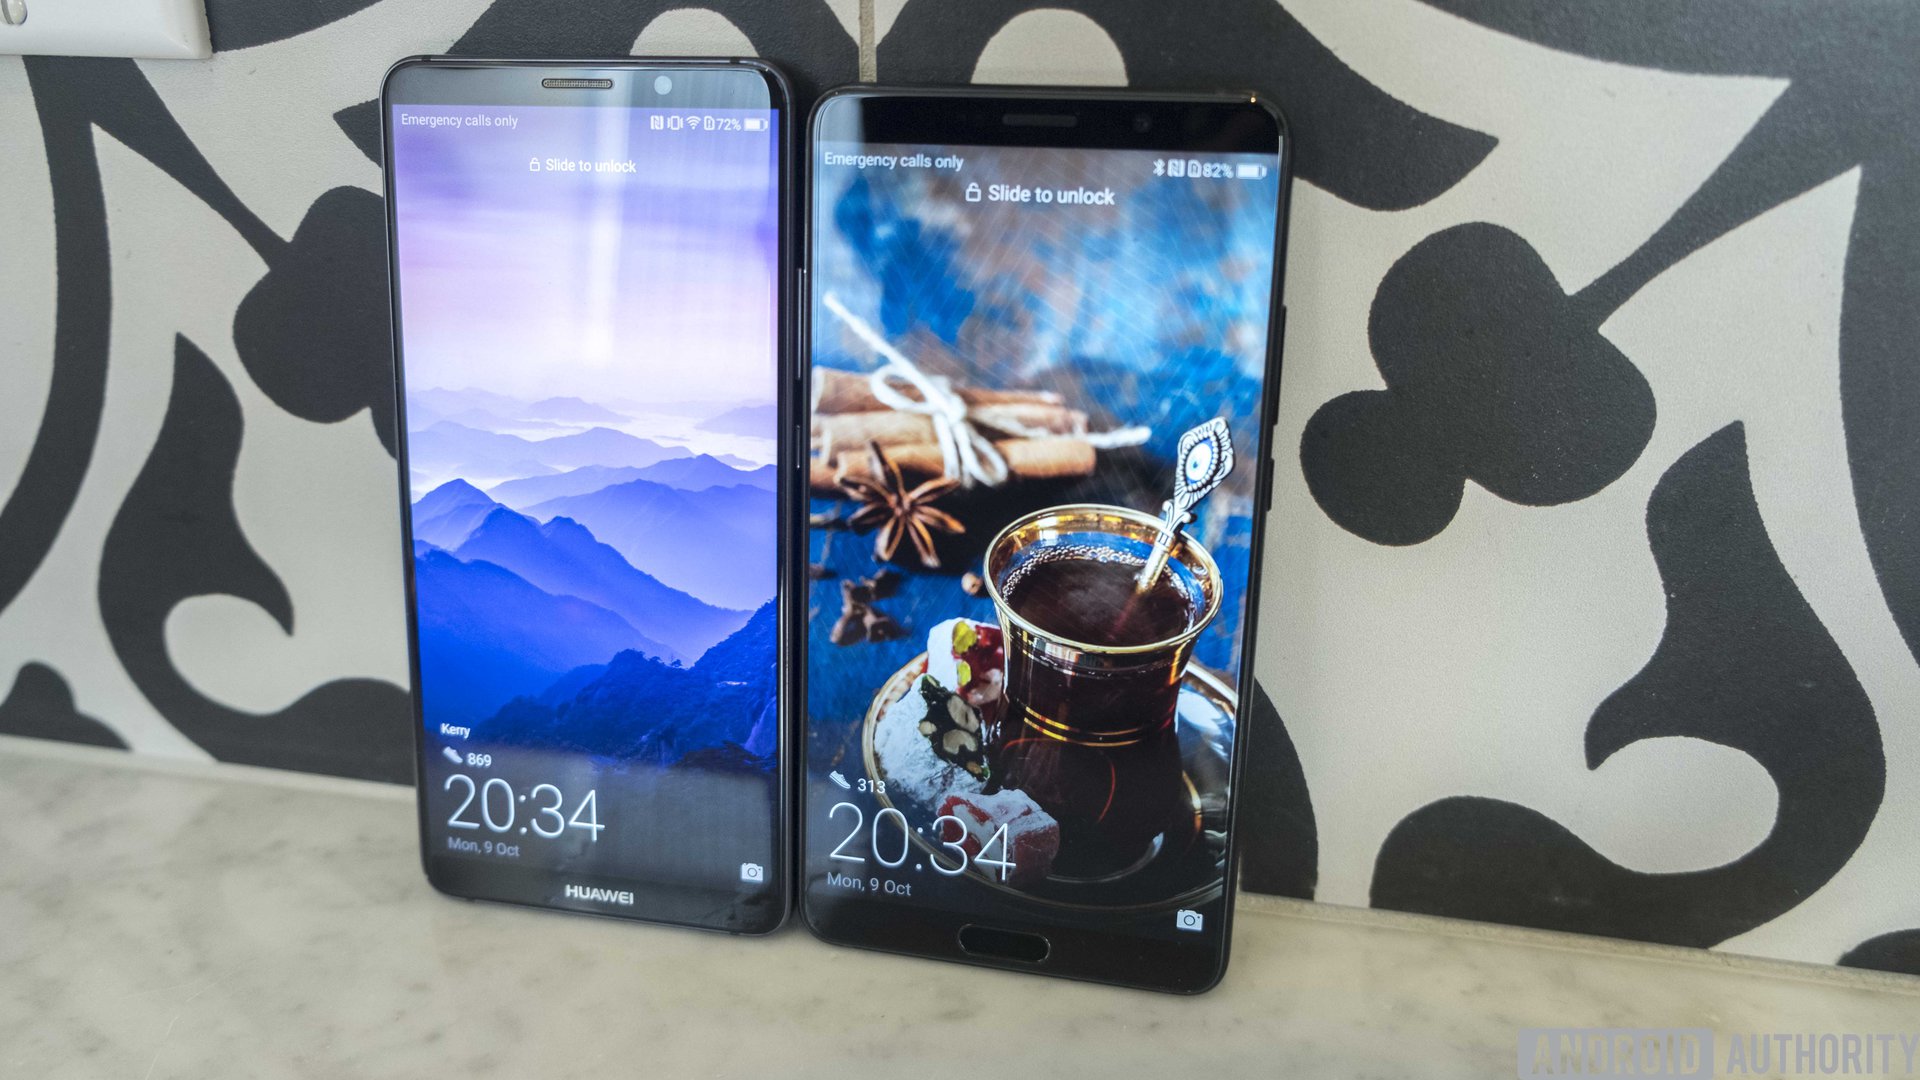 Huawei Mate 9 Pro Vs. Mate 9: Hands-On Comparison